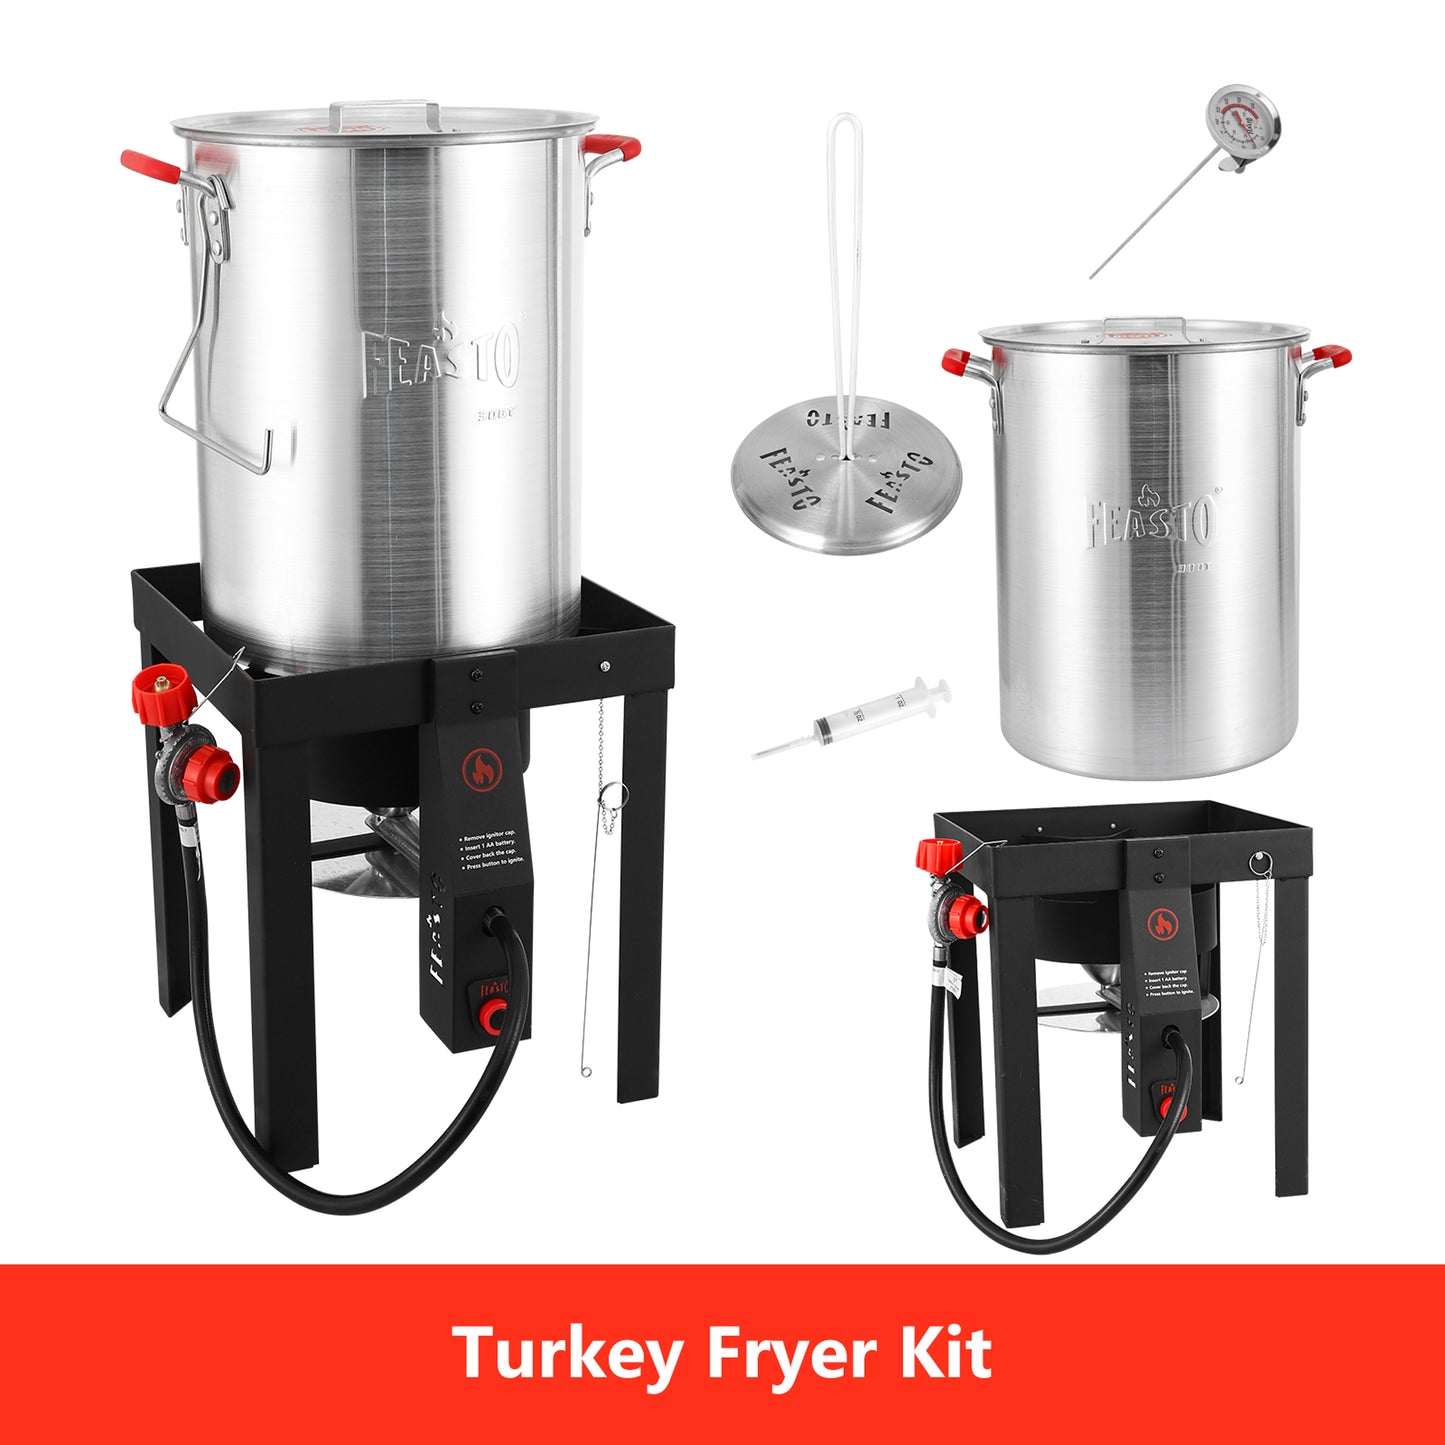 FEASTO 4 in 1 Turkey and Fish Fryer Set with 30 Qt & 10 Qt Aluminum Pots Electronic Ignition Outdoor Propane Gas Cooker with Adjustable 0-10 PSI Regulator Non-Assembly Frame Stand